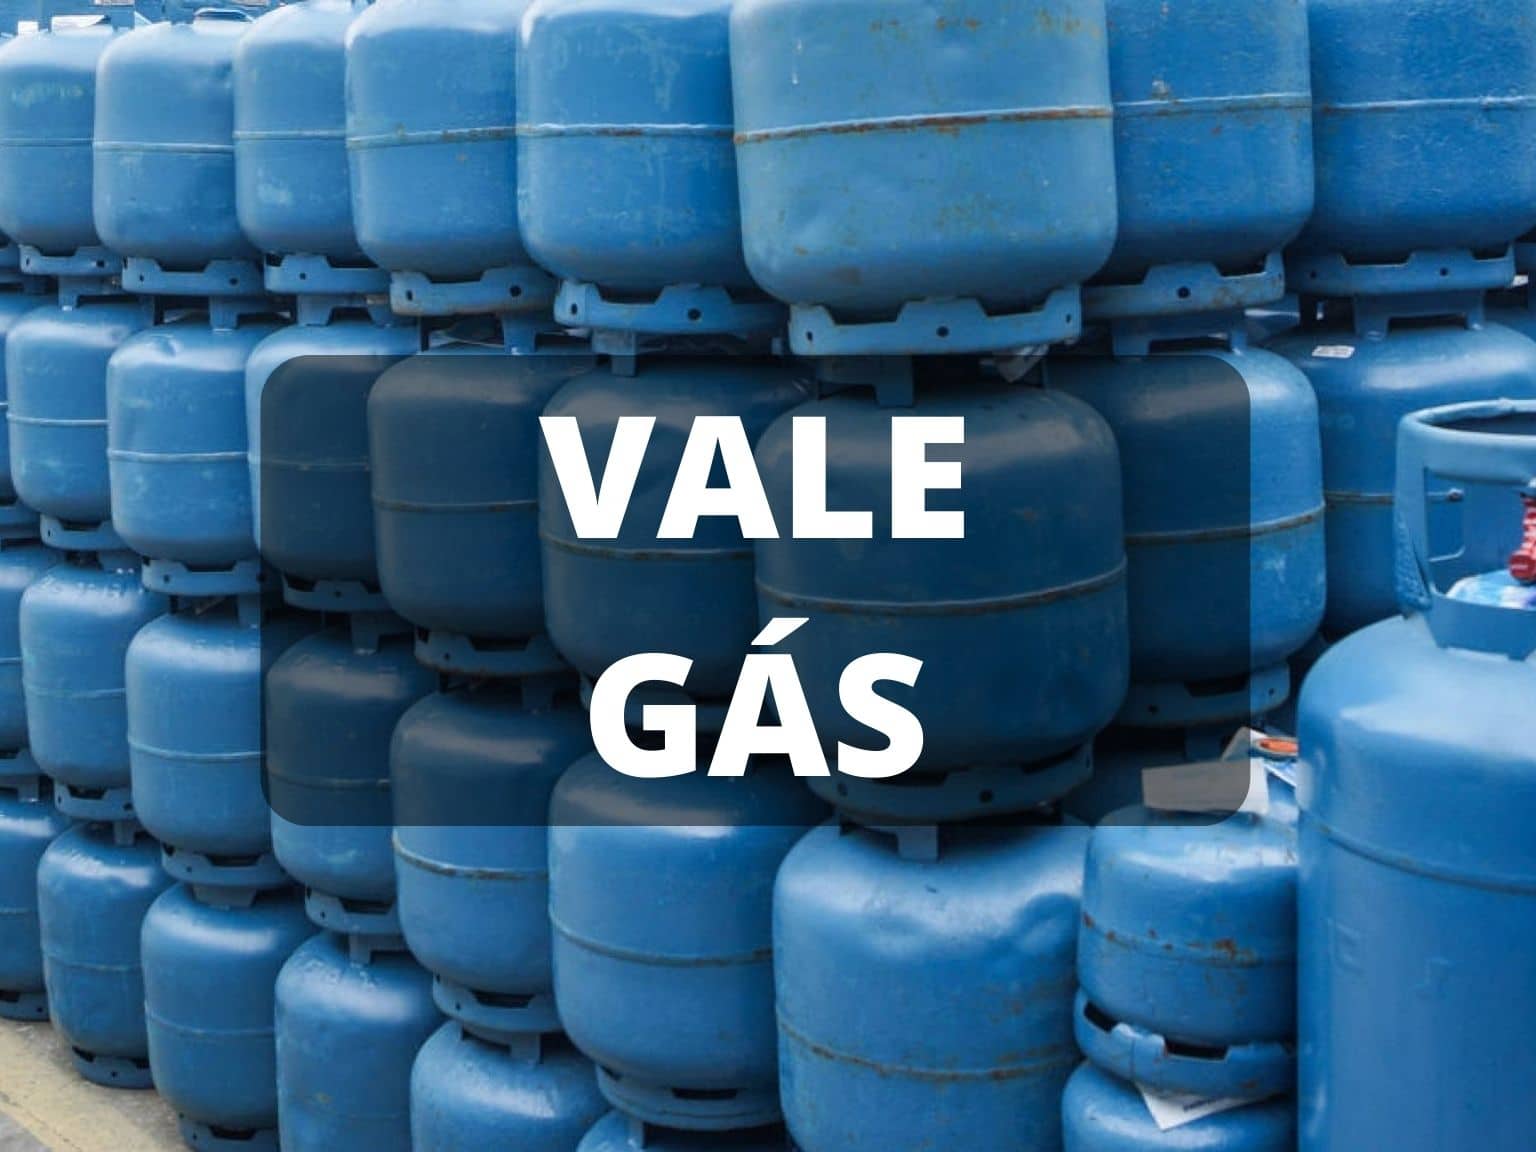 Vale Gas